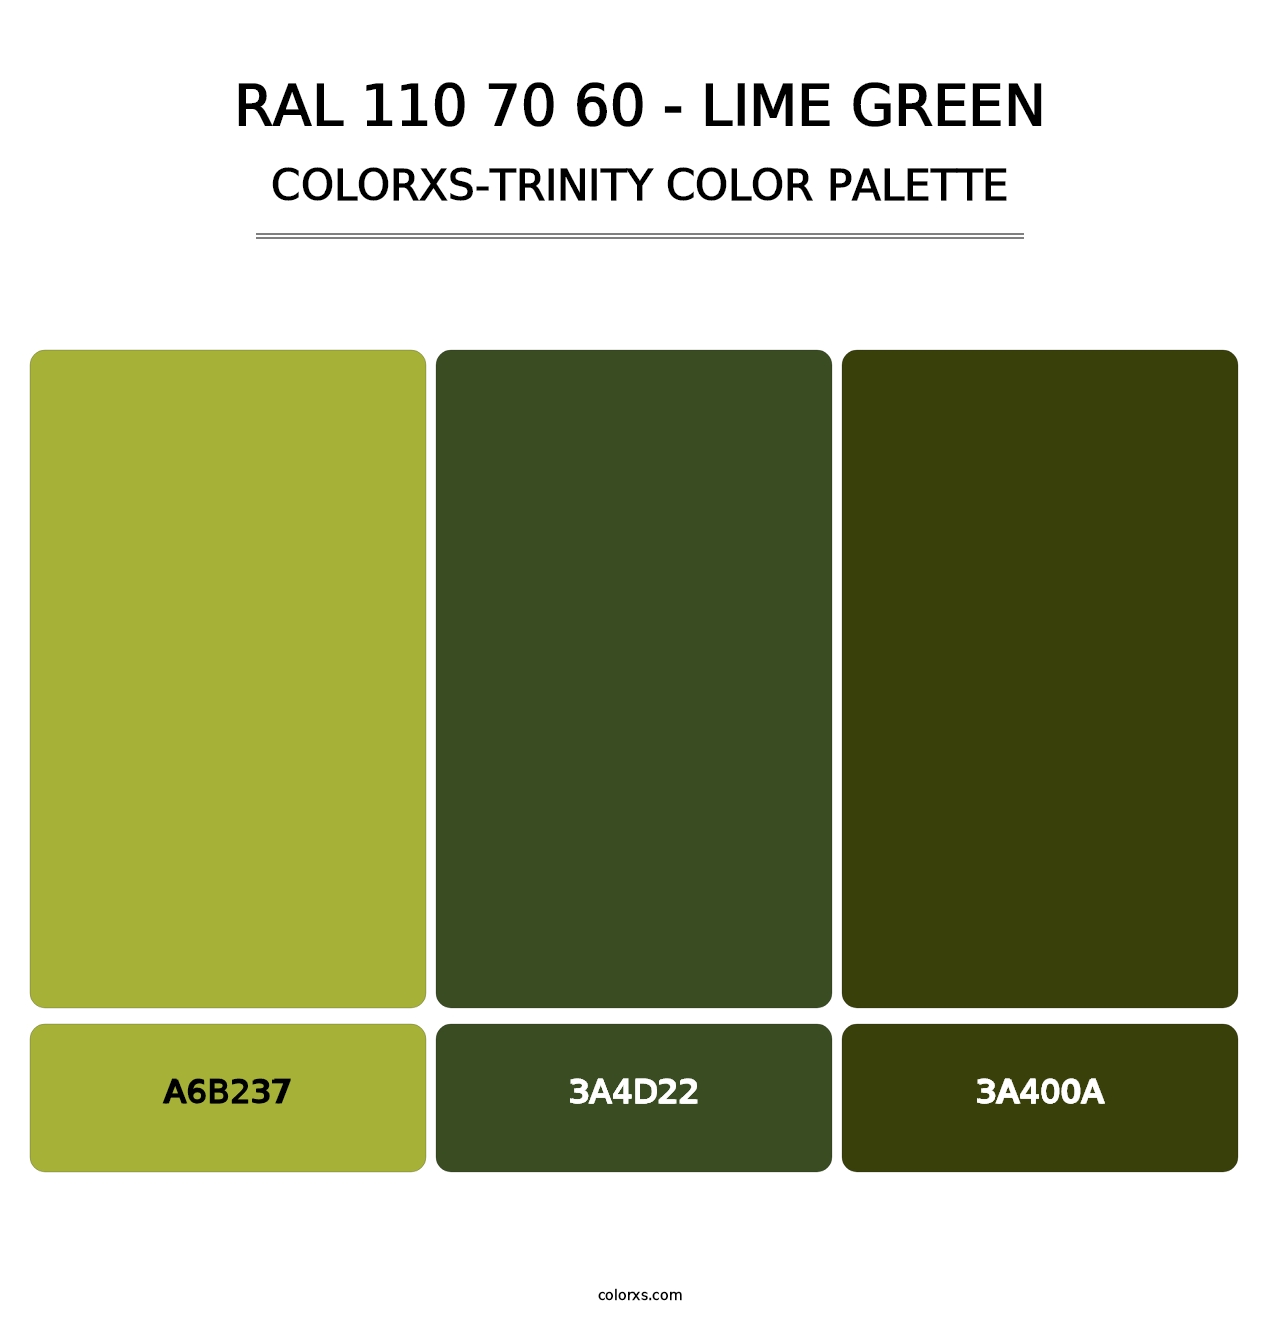 RAL 110 70 60 - Lime Green - Colorxs Trinity Palette